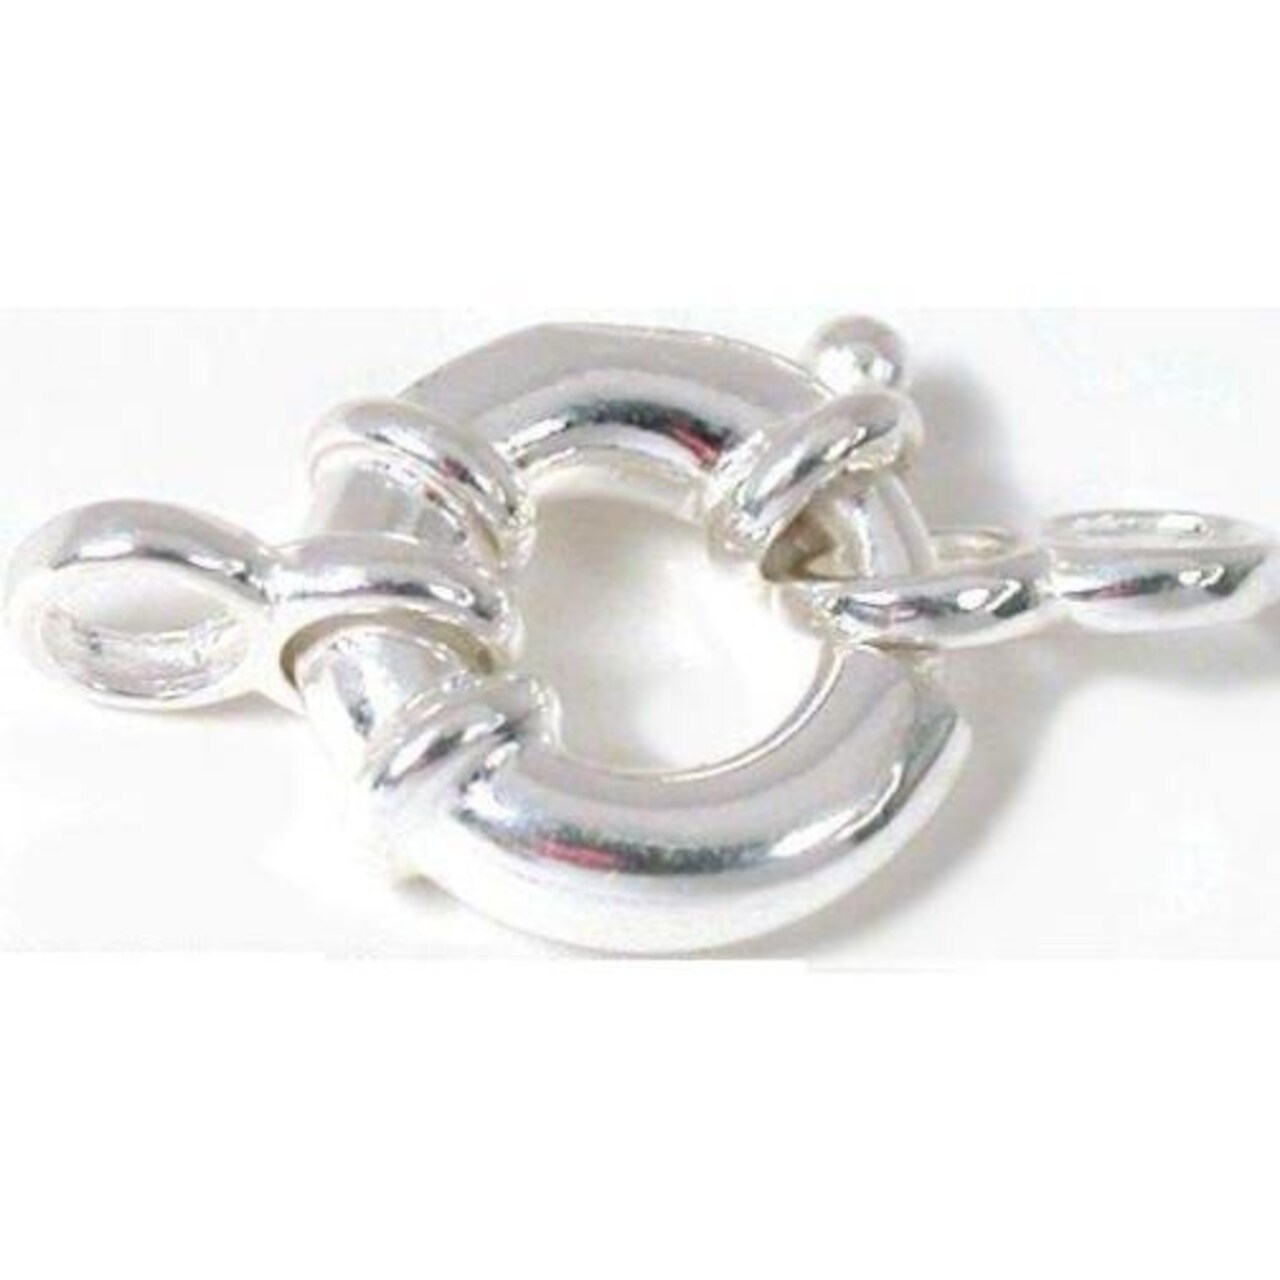 Spring Ring Clasp Sterling Silver Toggle Necklace 12mm